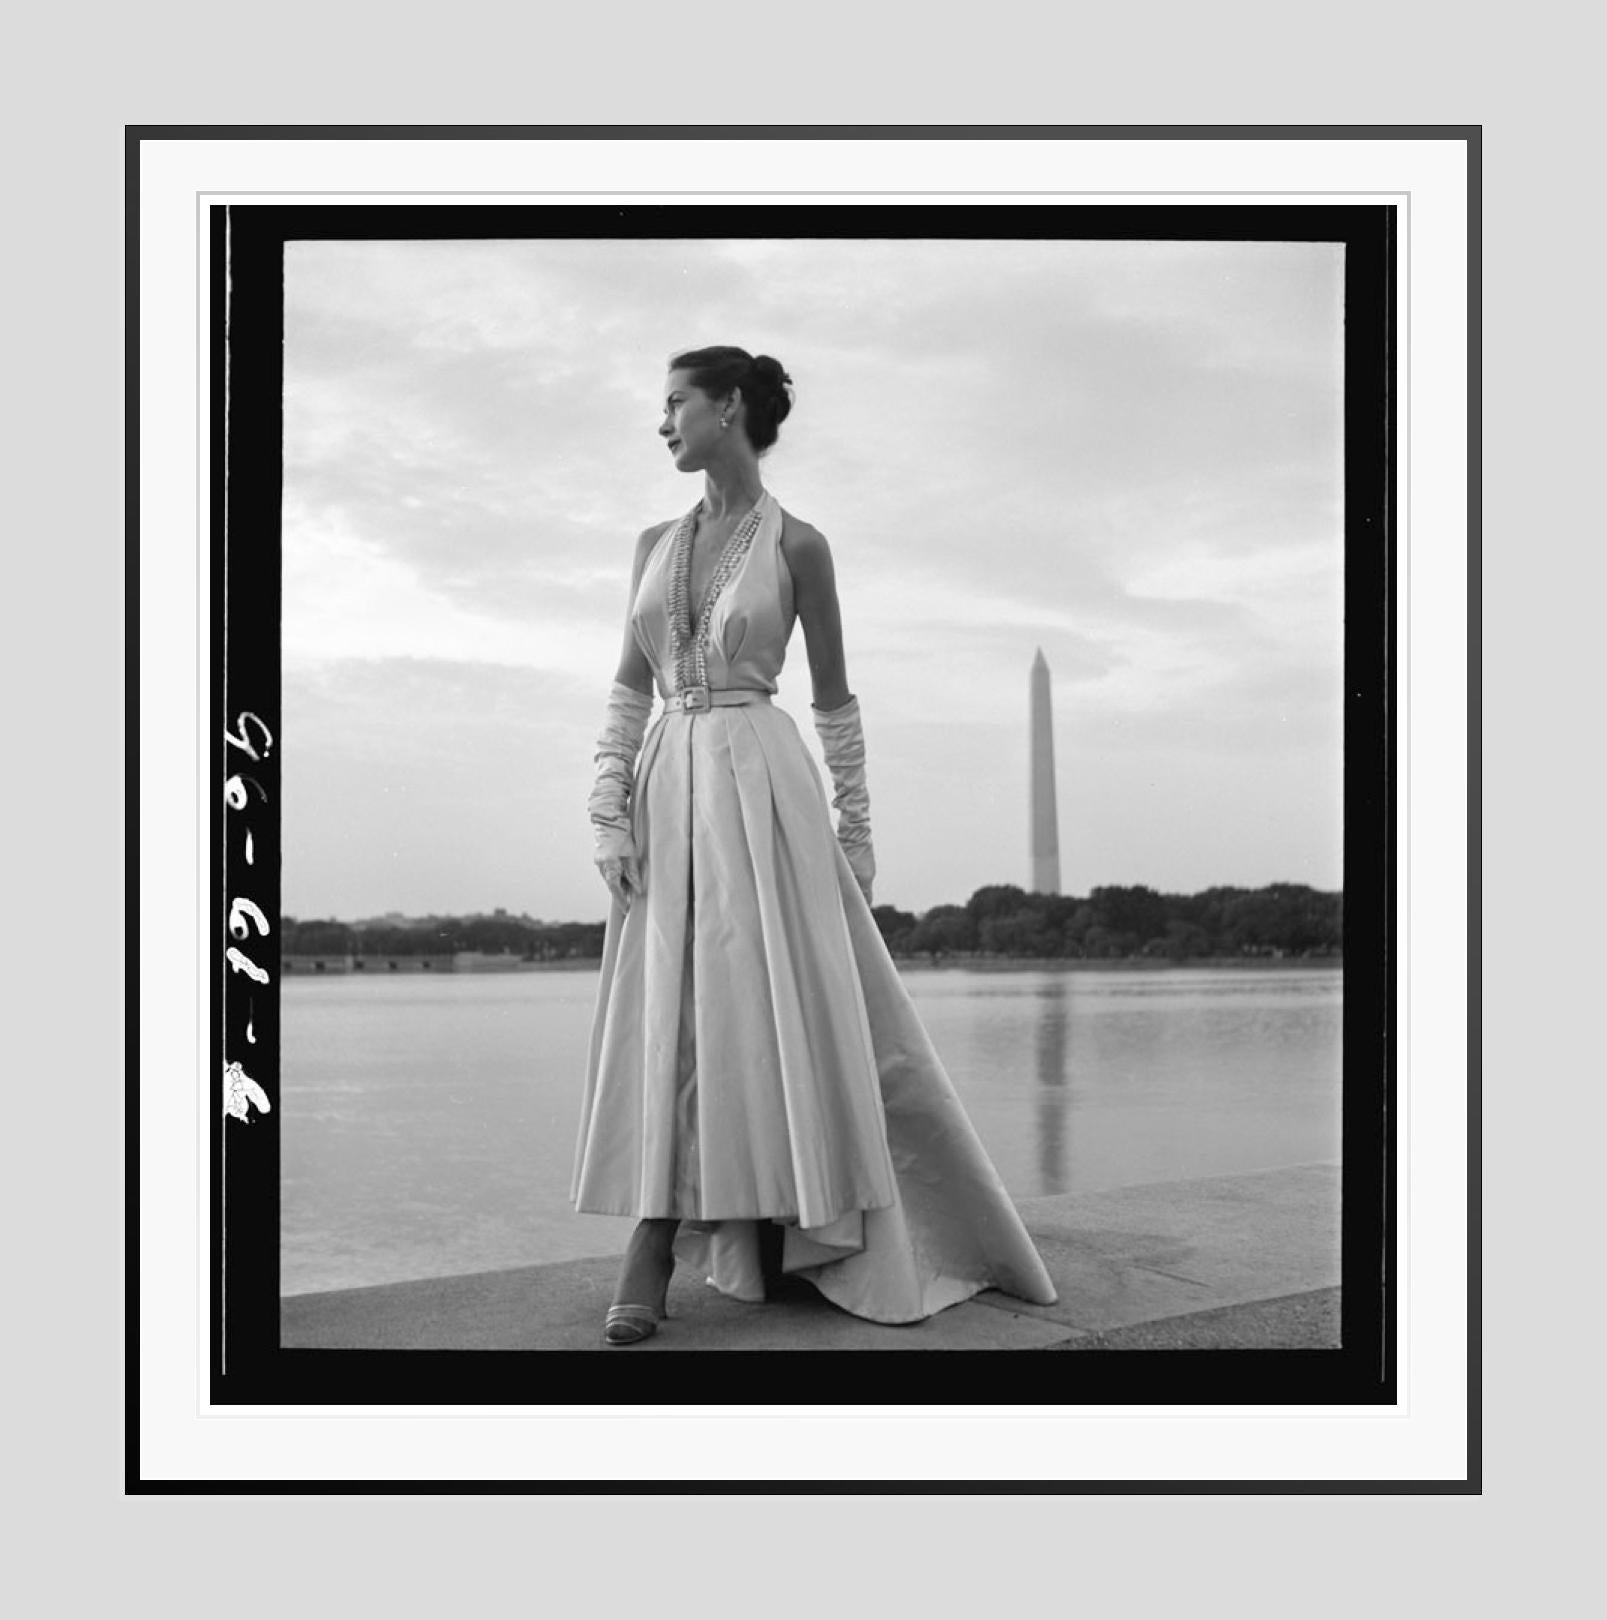 Washington Monument Fashion Shoot 
1949

Fashion model posing in an evening gown with Tidal Basin and Washington Monument in the background, USA

by Toni Frissell

60 x 60” / 152 x 152 cm paper size 
Archival pigment print
unframed 
(framing